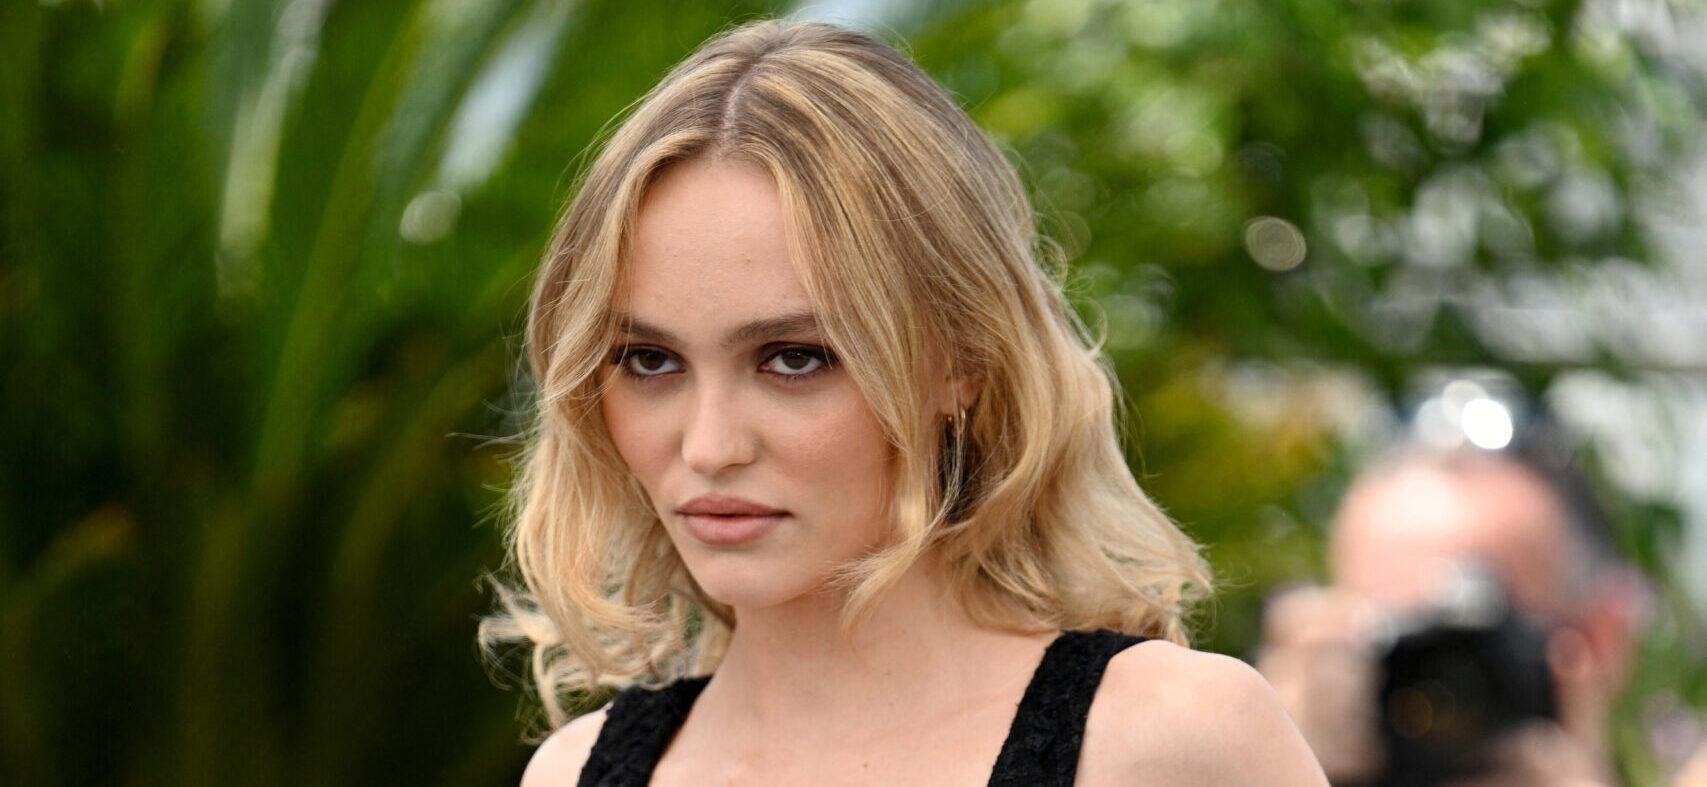 Lily-Rose Depp’s Nude ‘Idol’ Scenes Catapult Her To Top of Mr. Skin’s Charts